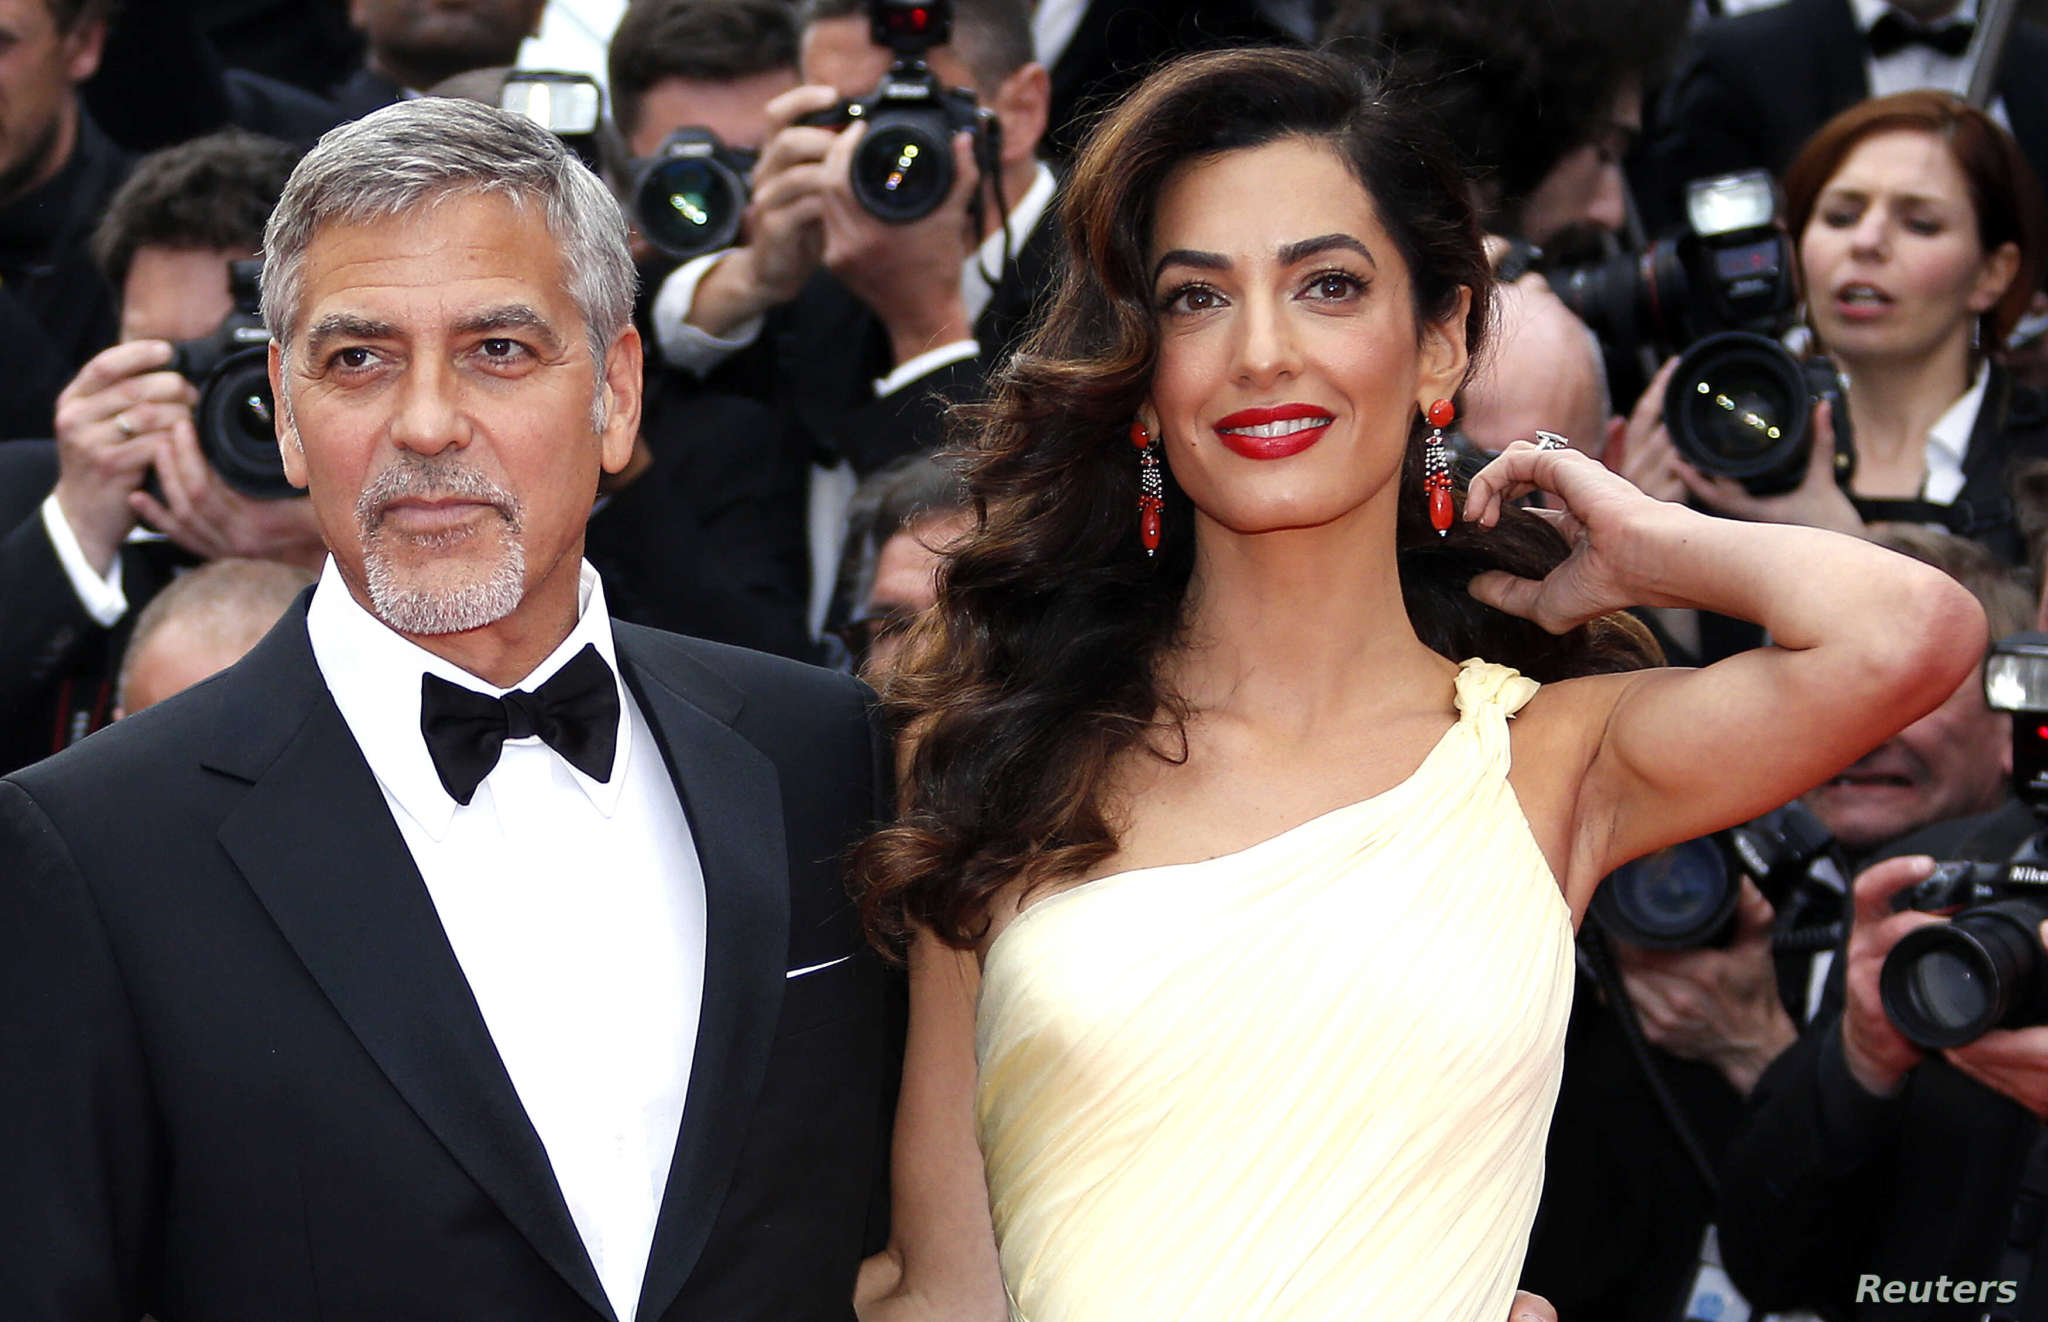 Amal Clooney Vows To Never Put Her Husband George Clooney Through THIS Again ‘For The Sake Of’ Their Marriage!